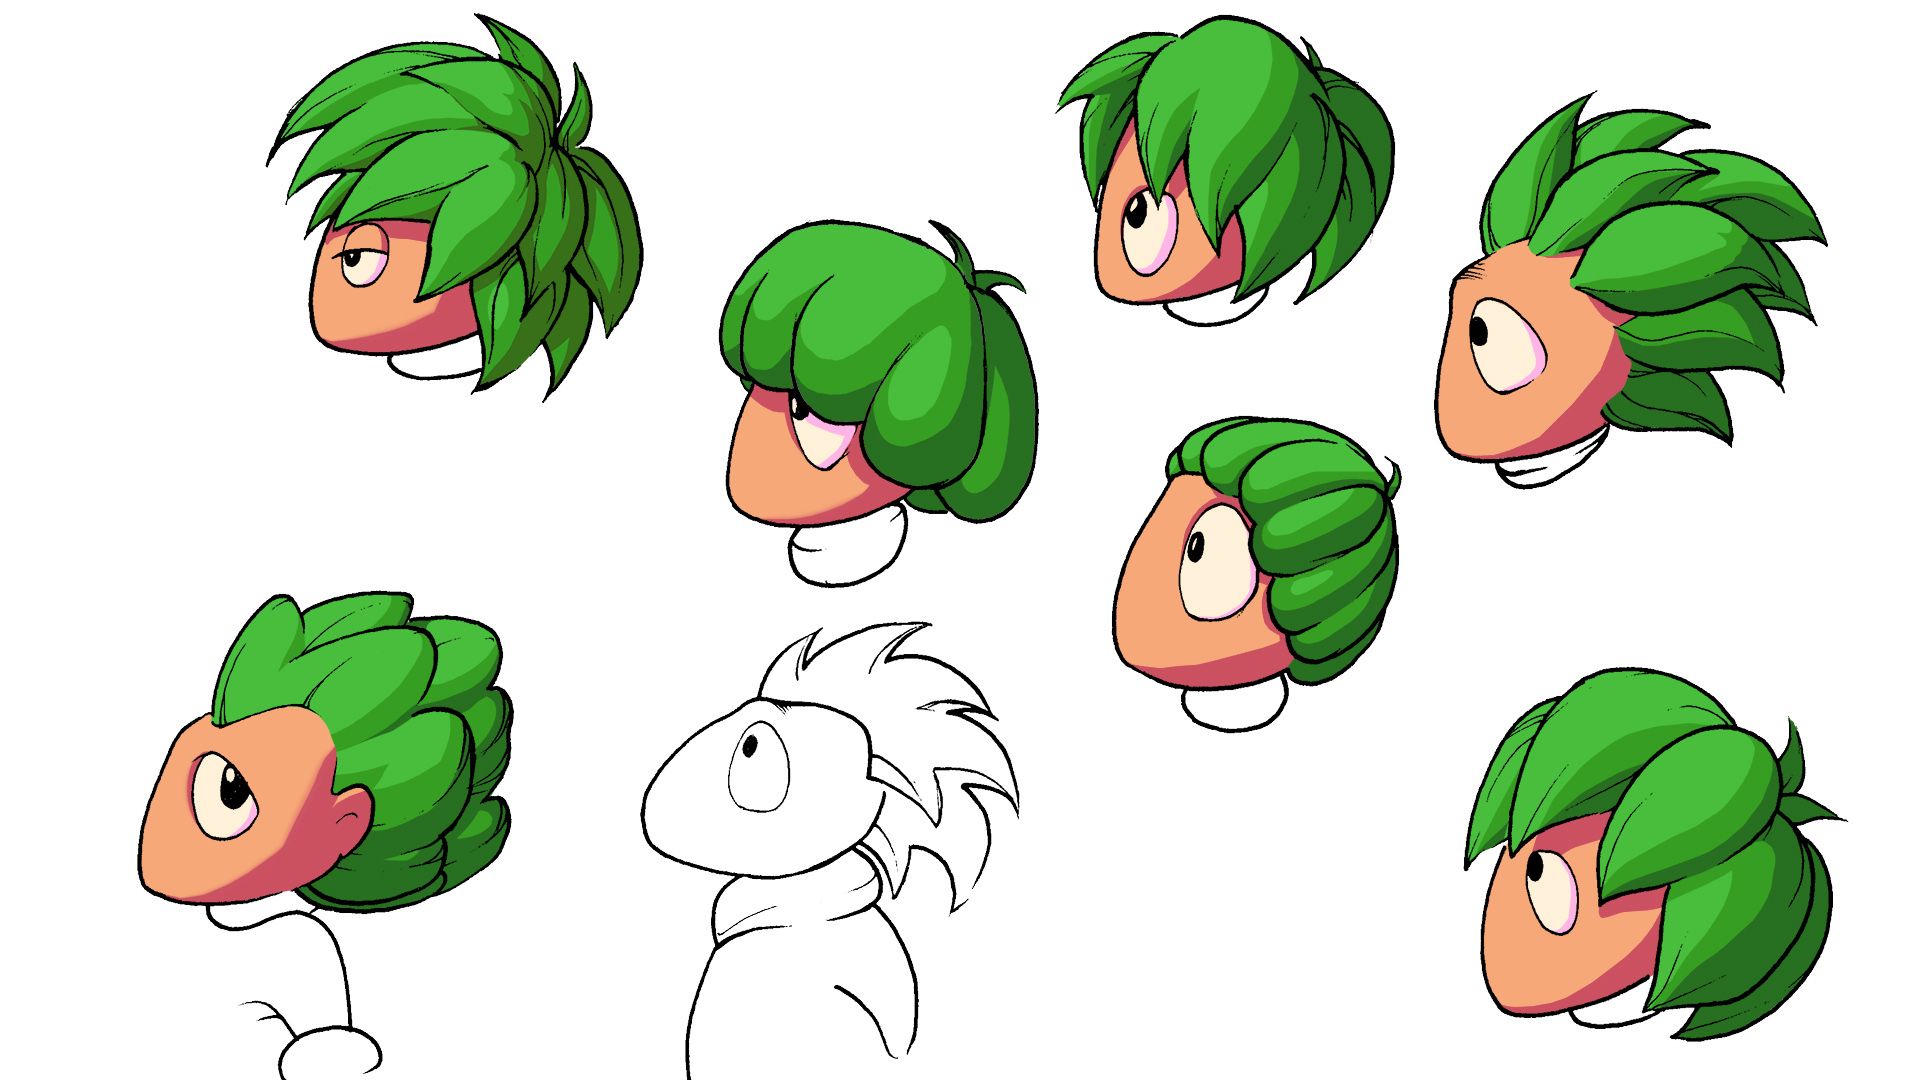 Lemming redesign proposals for Team17 Lemmings on the PSP